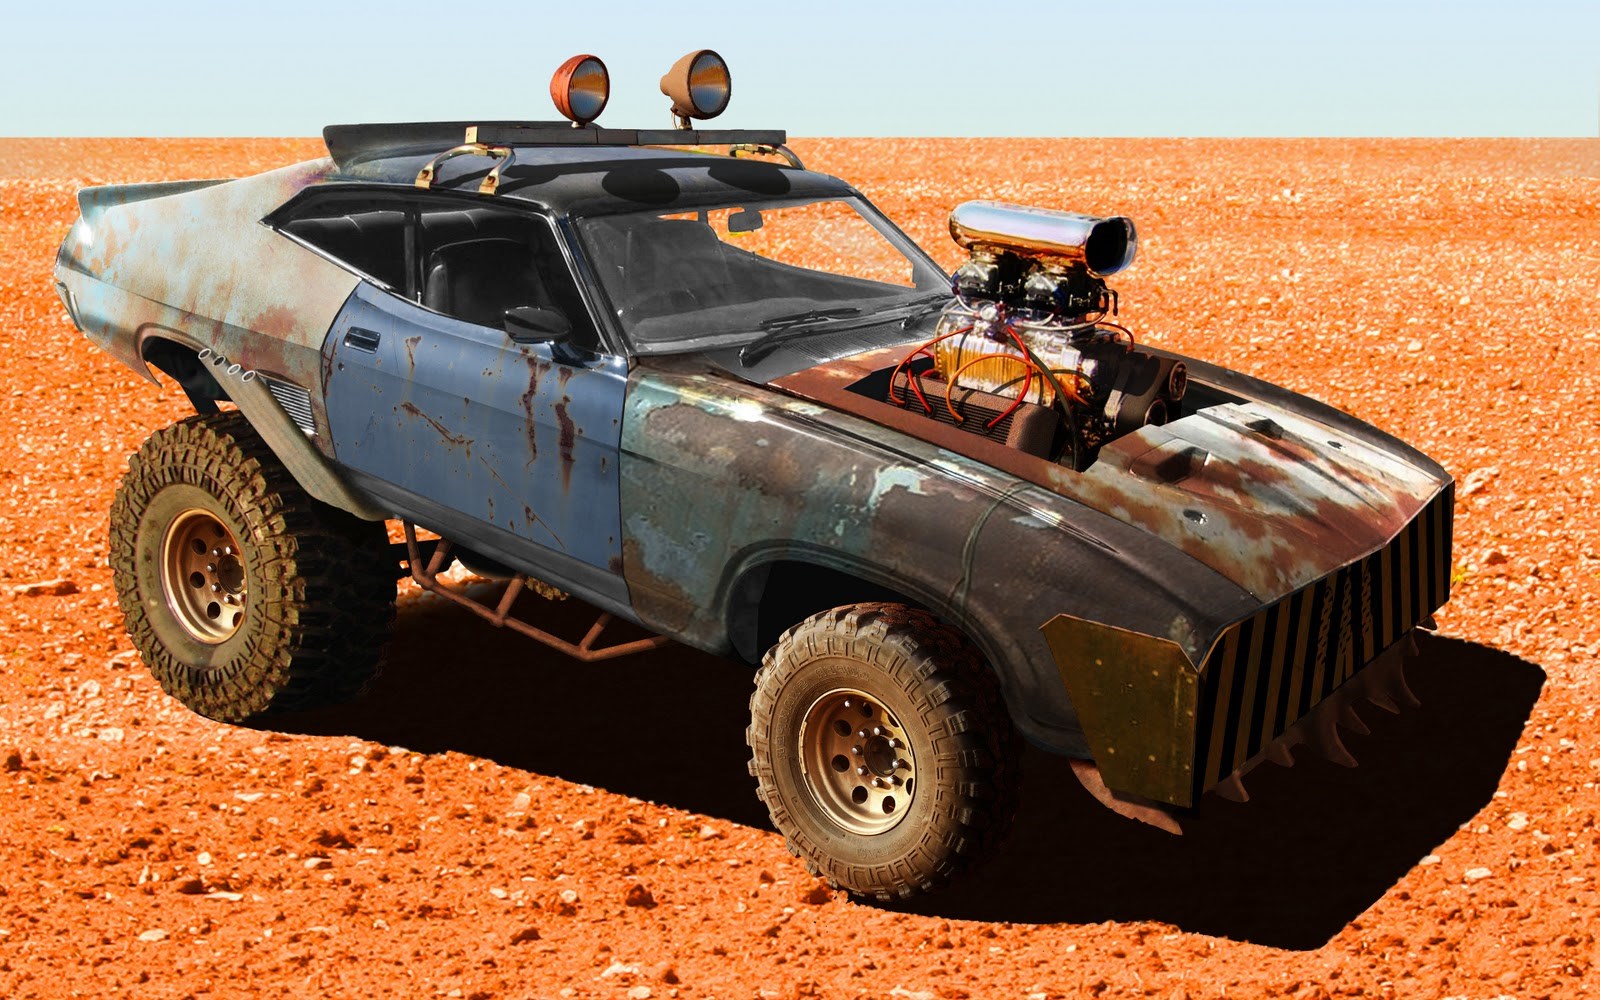 Humster3D car render competition - Pontiac The Judge 4x4 Mad Max Style